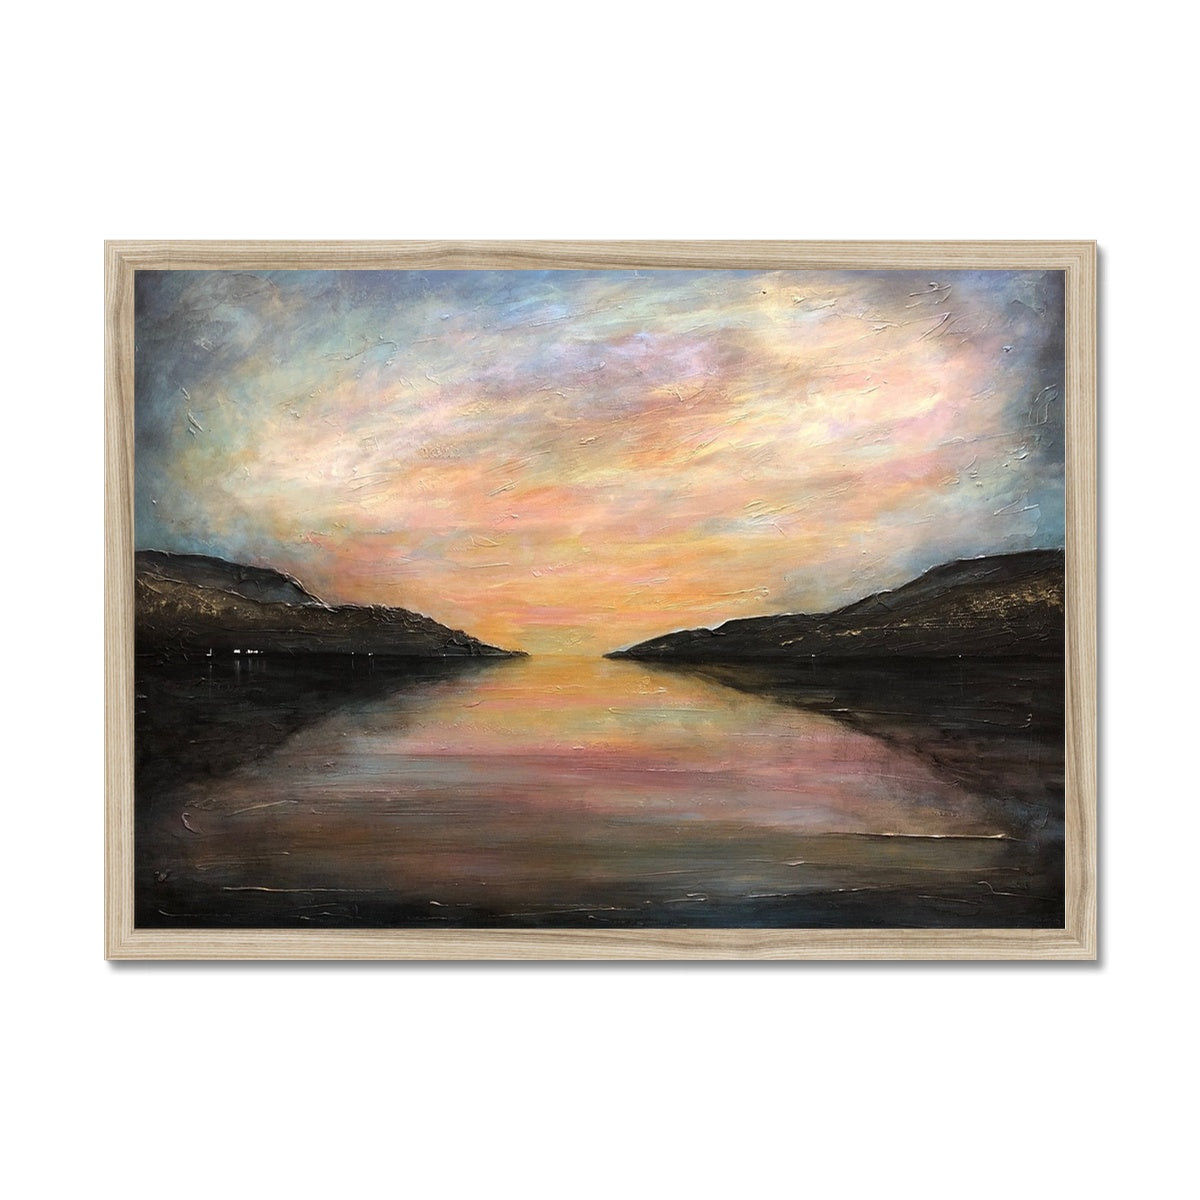 Loch Ness Glow Painting | Framed Prints From Scotland-Framed Prints-Scottish Lochs & Mountains Art Gallery-A2 Landscape-Natural Frame-Paintings, Prints, Homeware, Art Gifts From Scotland By Scottish Artist Kevin Hunter